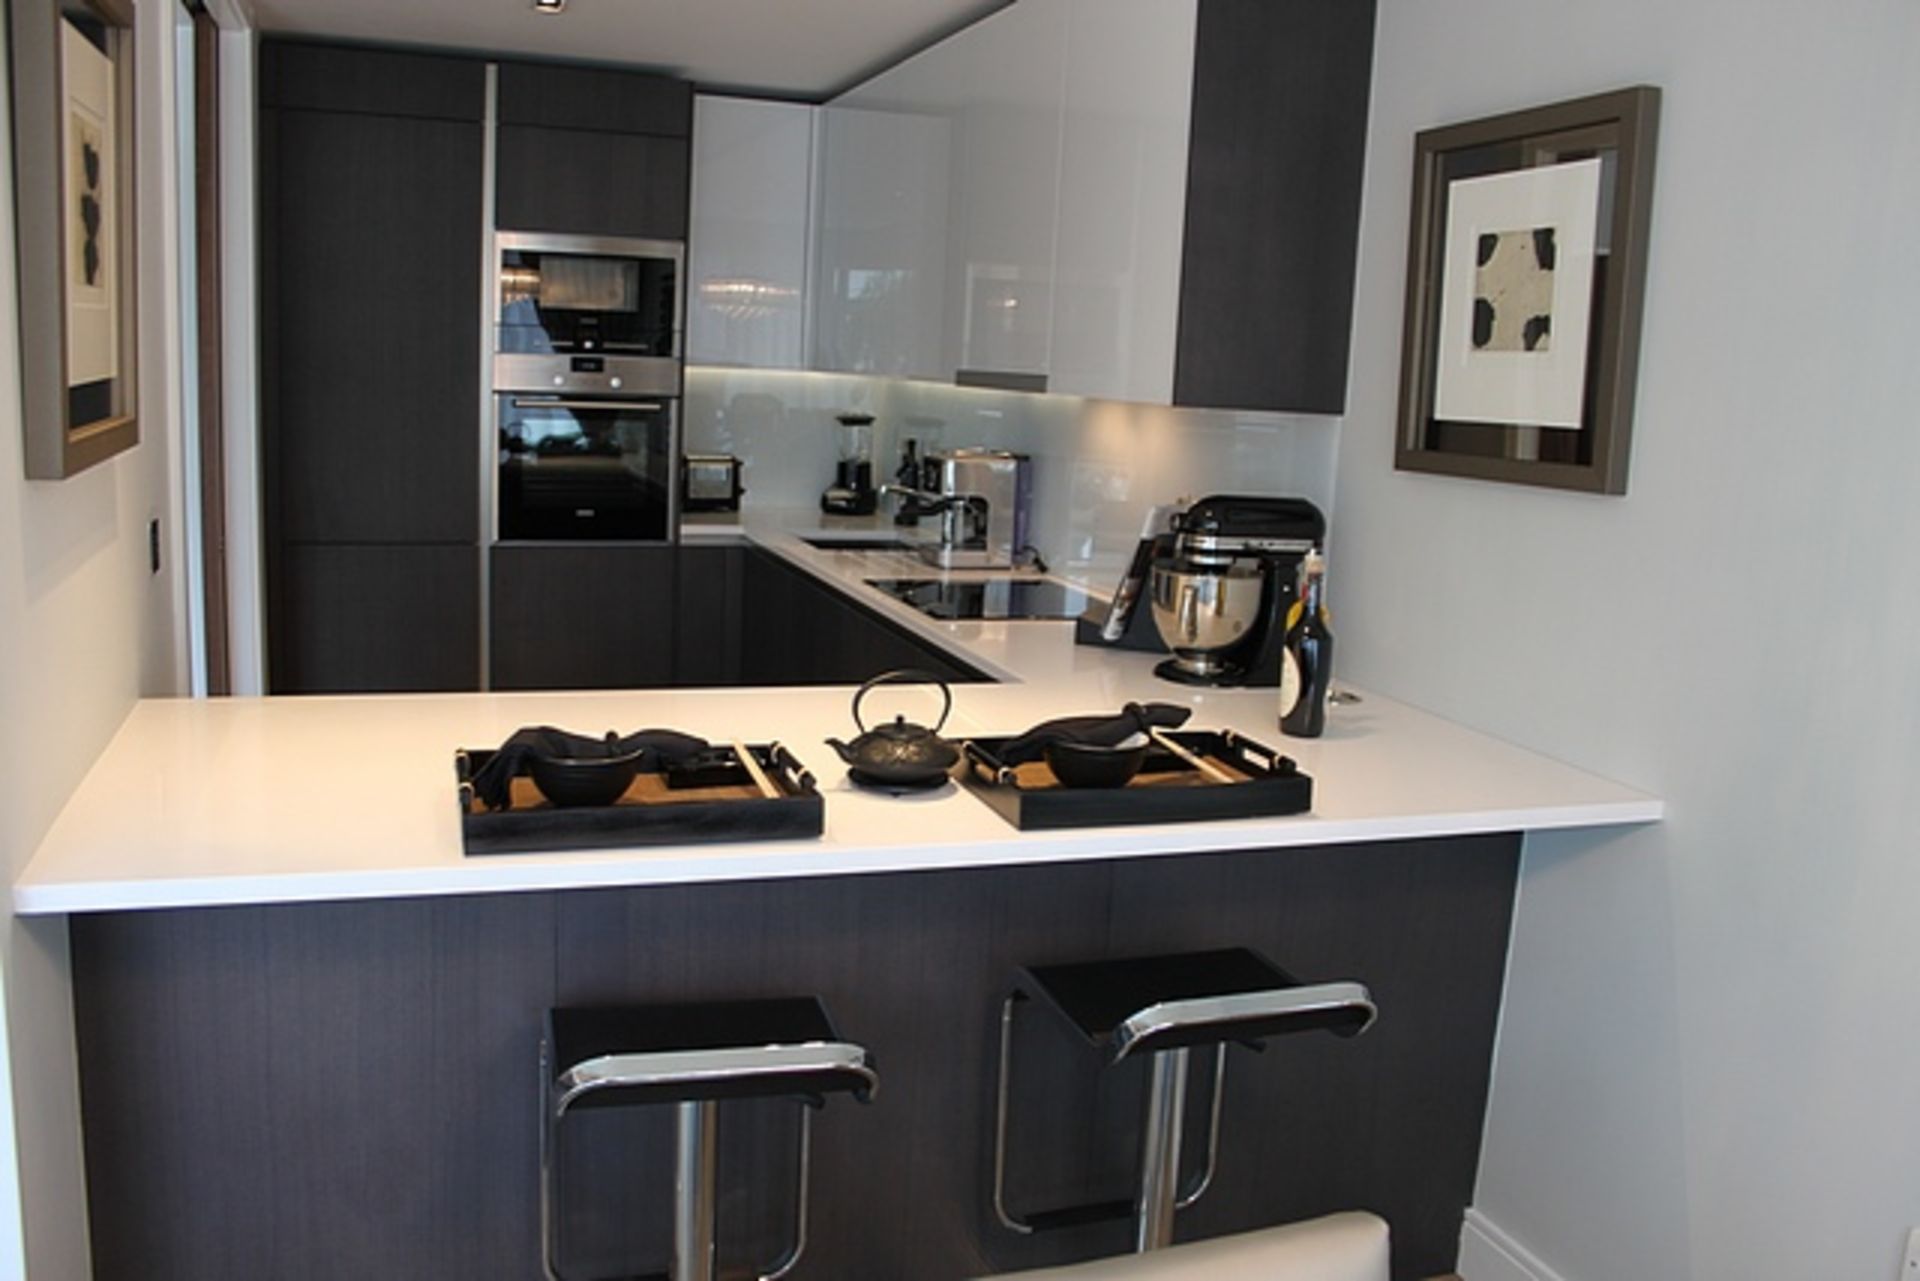 Complete U shaped kitchen with base and wall cabinets complete with Siemens integral appliances of - Image 2 of 15